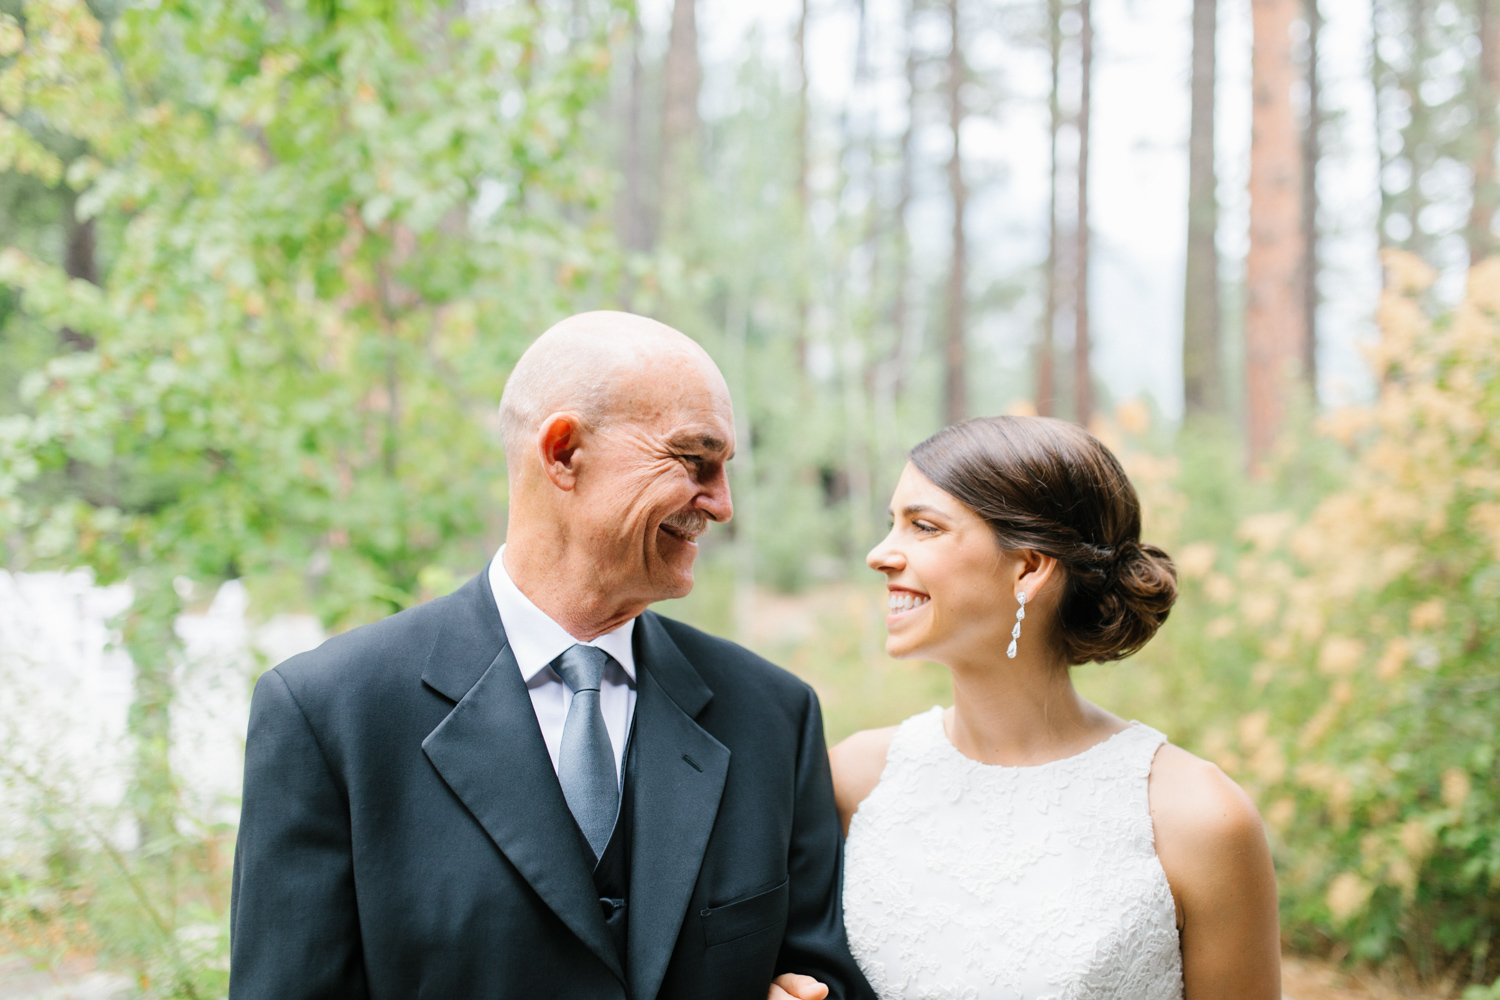 Grey and White Wedding in the Mountains of Leavenworth, Washington | Sleeping Lady | Classic and Timeless Wedding | VSCO | Father Daughter First Look Wedding DAy.jpg-1980.jpg